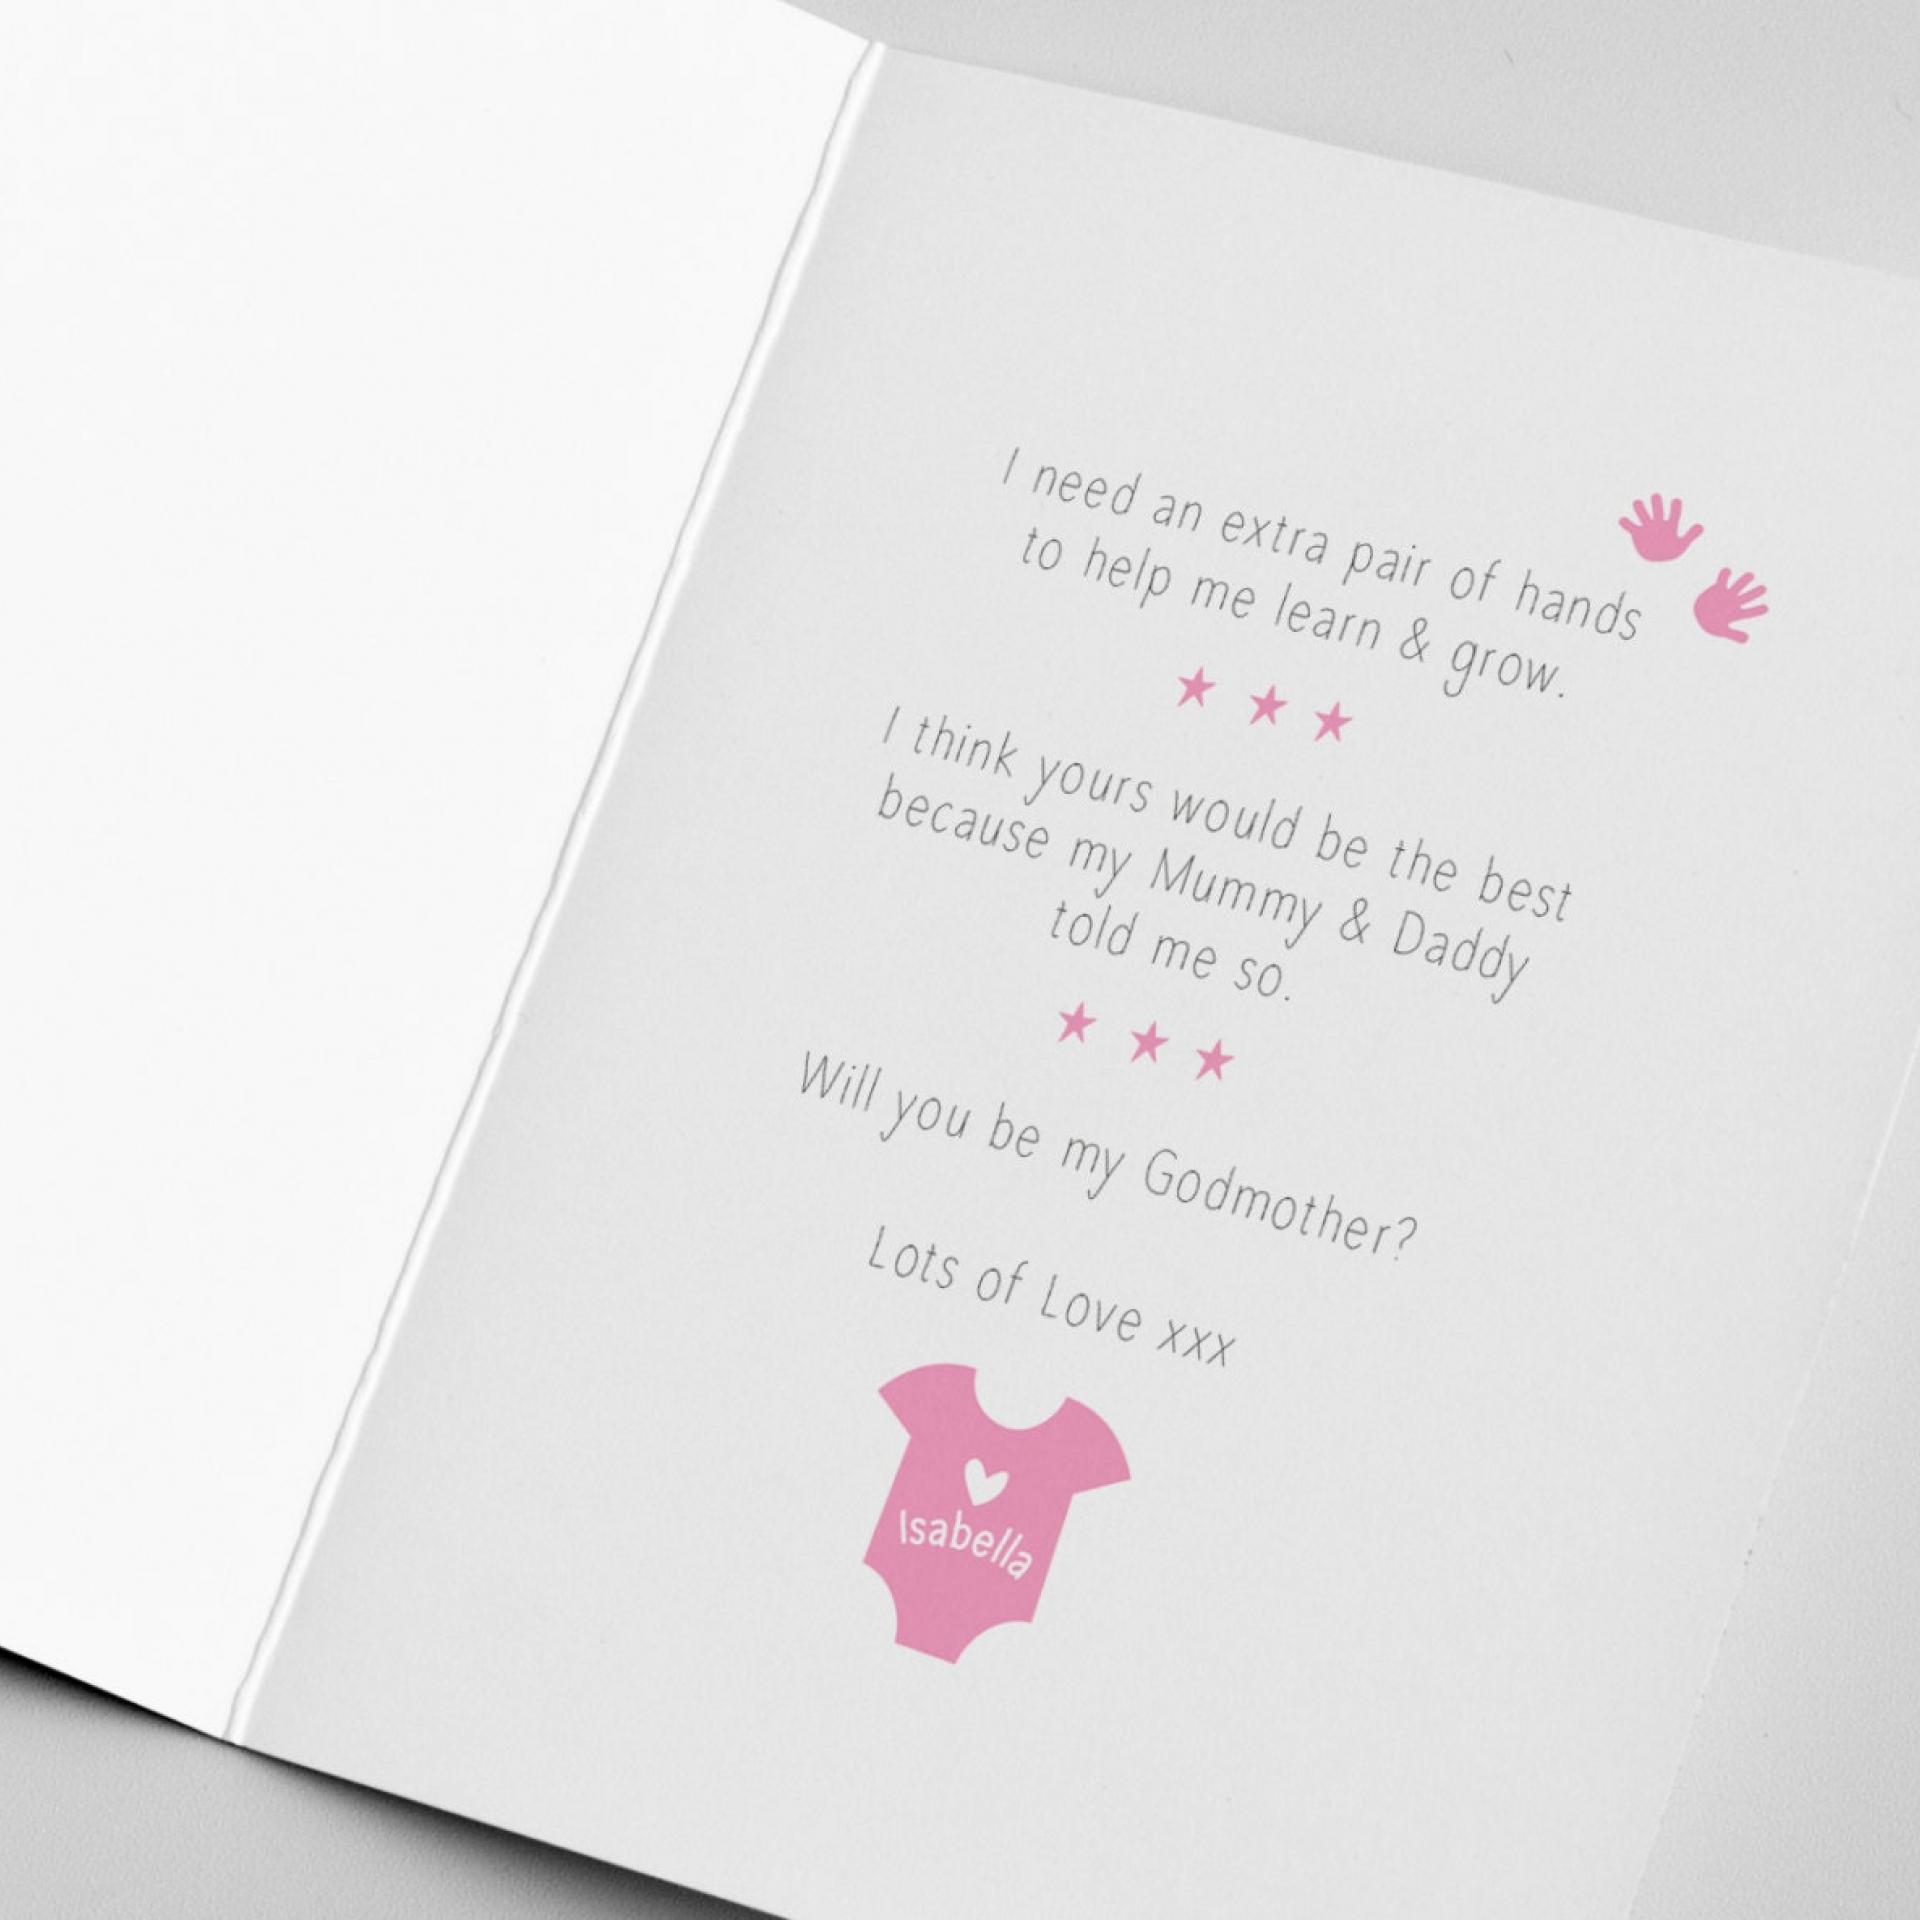 Personalised Godmother Card - Will you be my Godmother? With Special Message Inside, Asking Godmother, Baptism, Christening, Godparents card